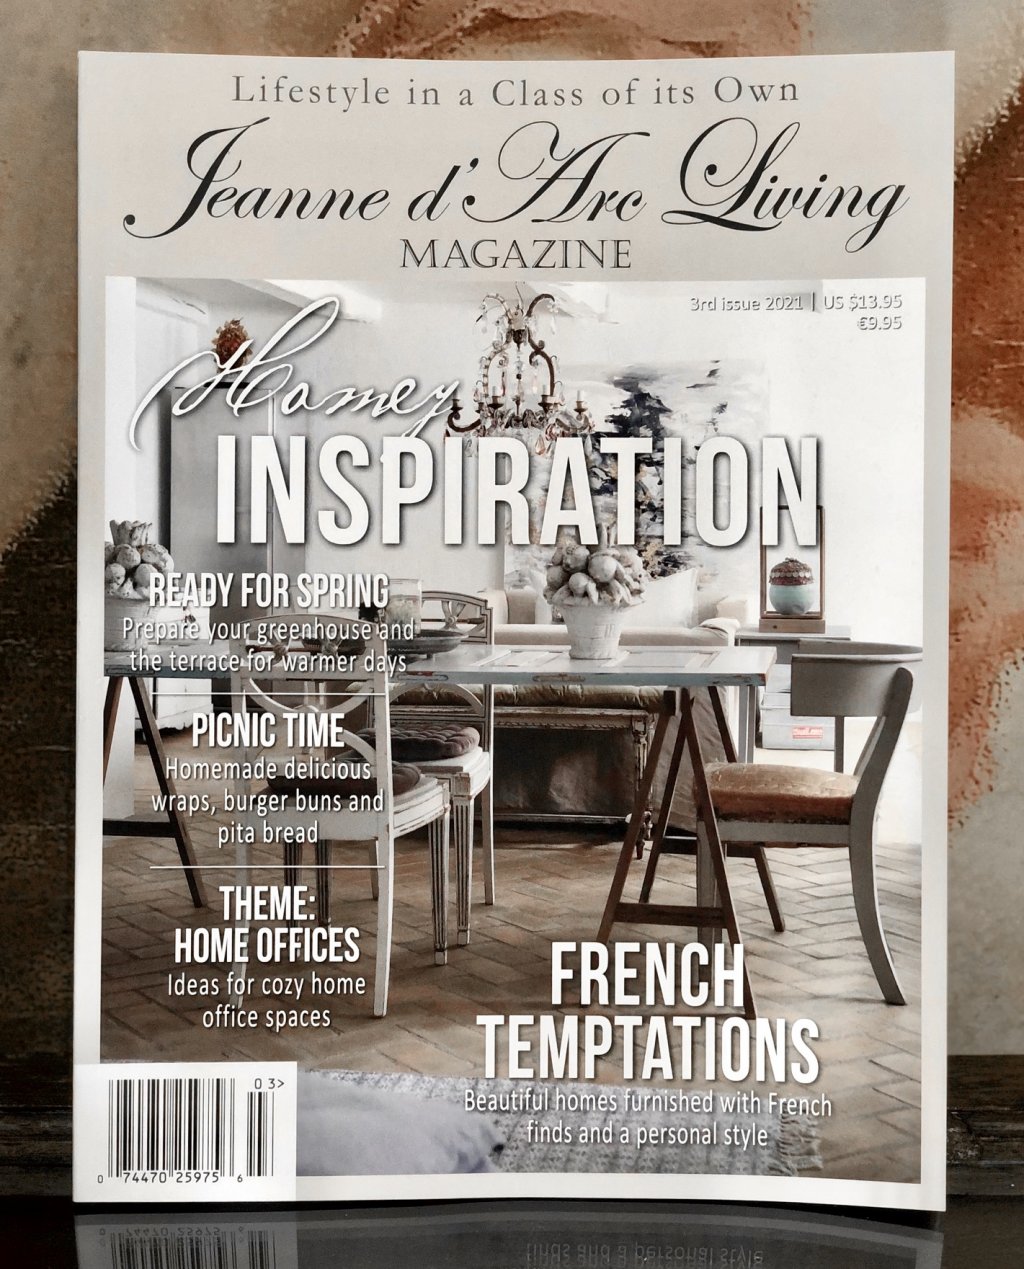 Jeanne d'Arc Living Magazine | Issue 3| 2021